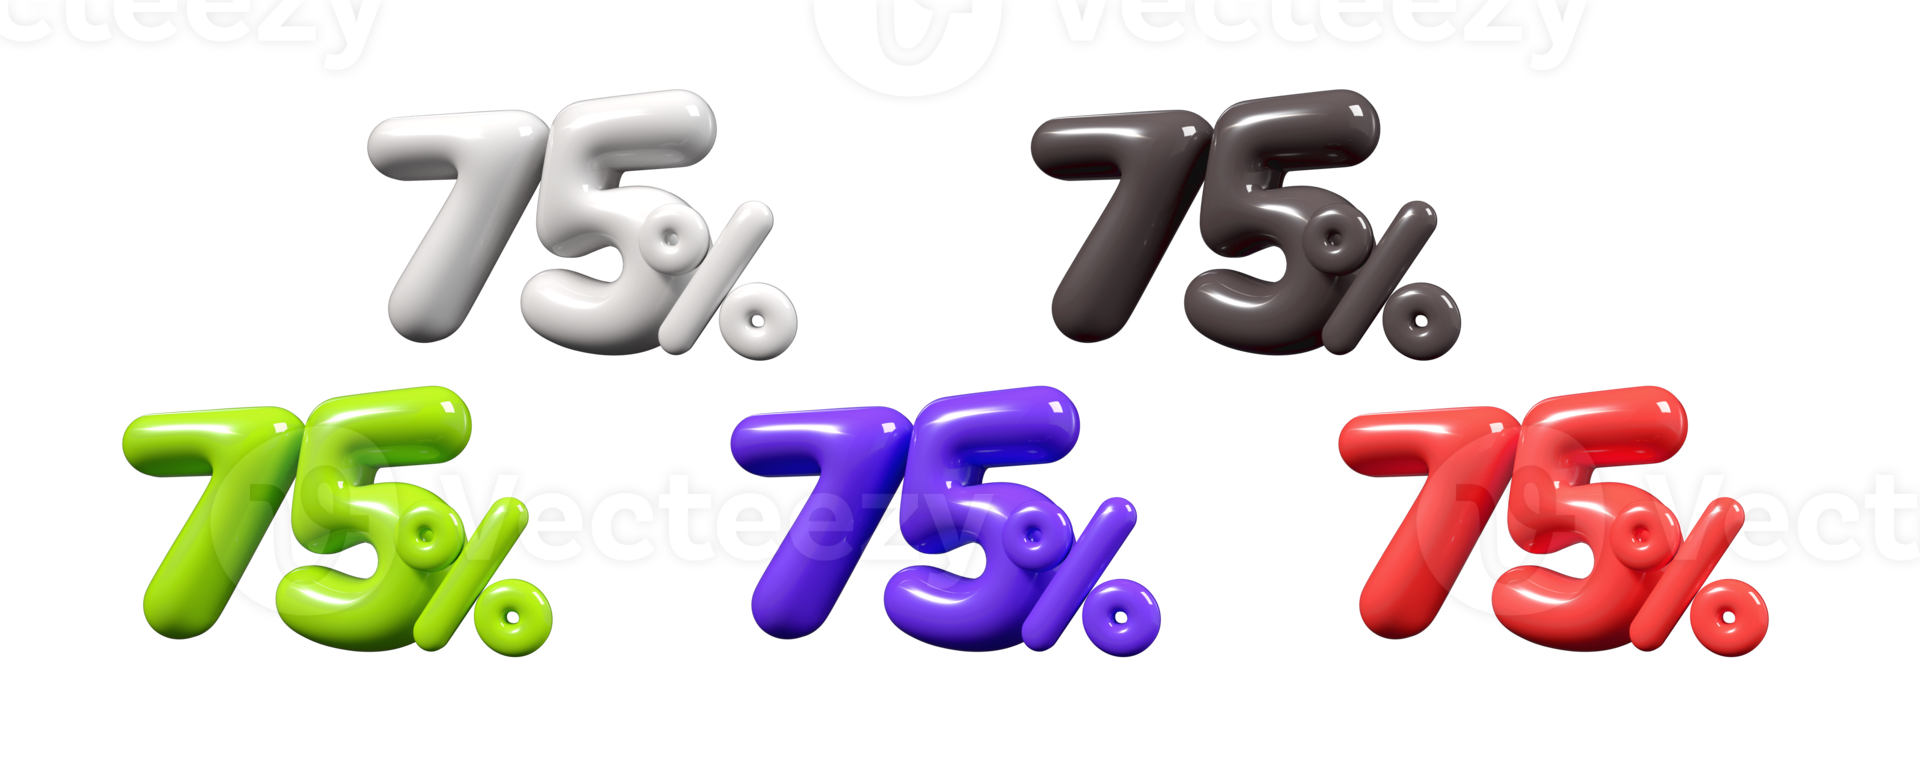 Discount bundle tag sale Trendy 3D number 75 percent element for promoting sales, clearing inventory, and boosting revenue png